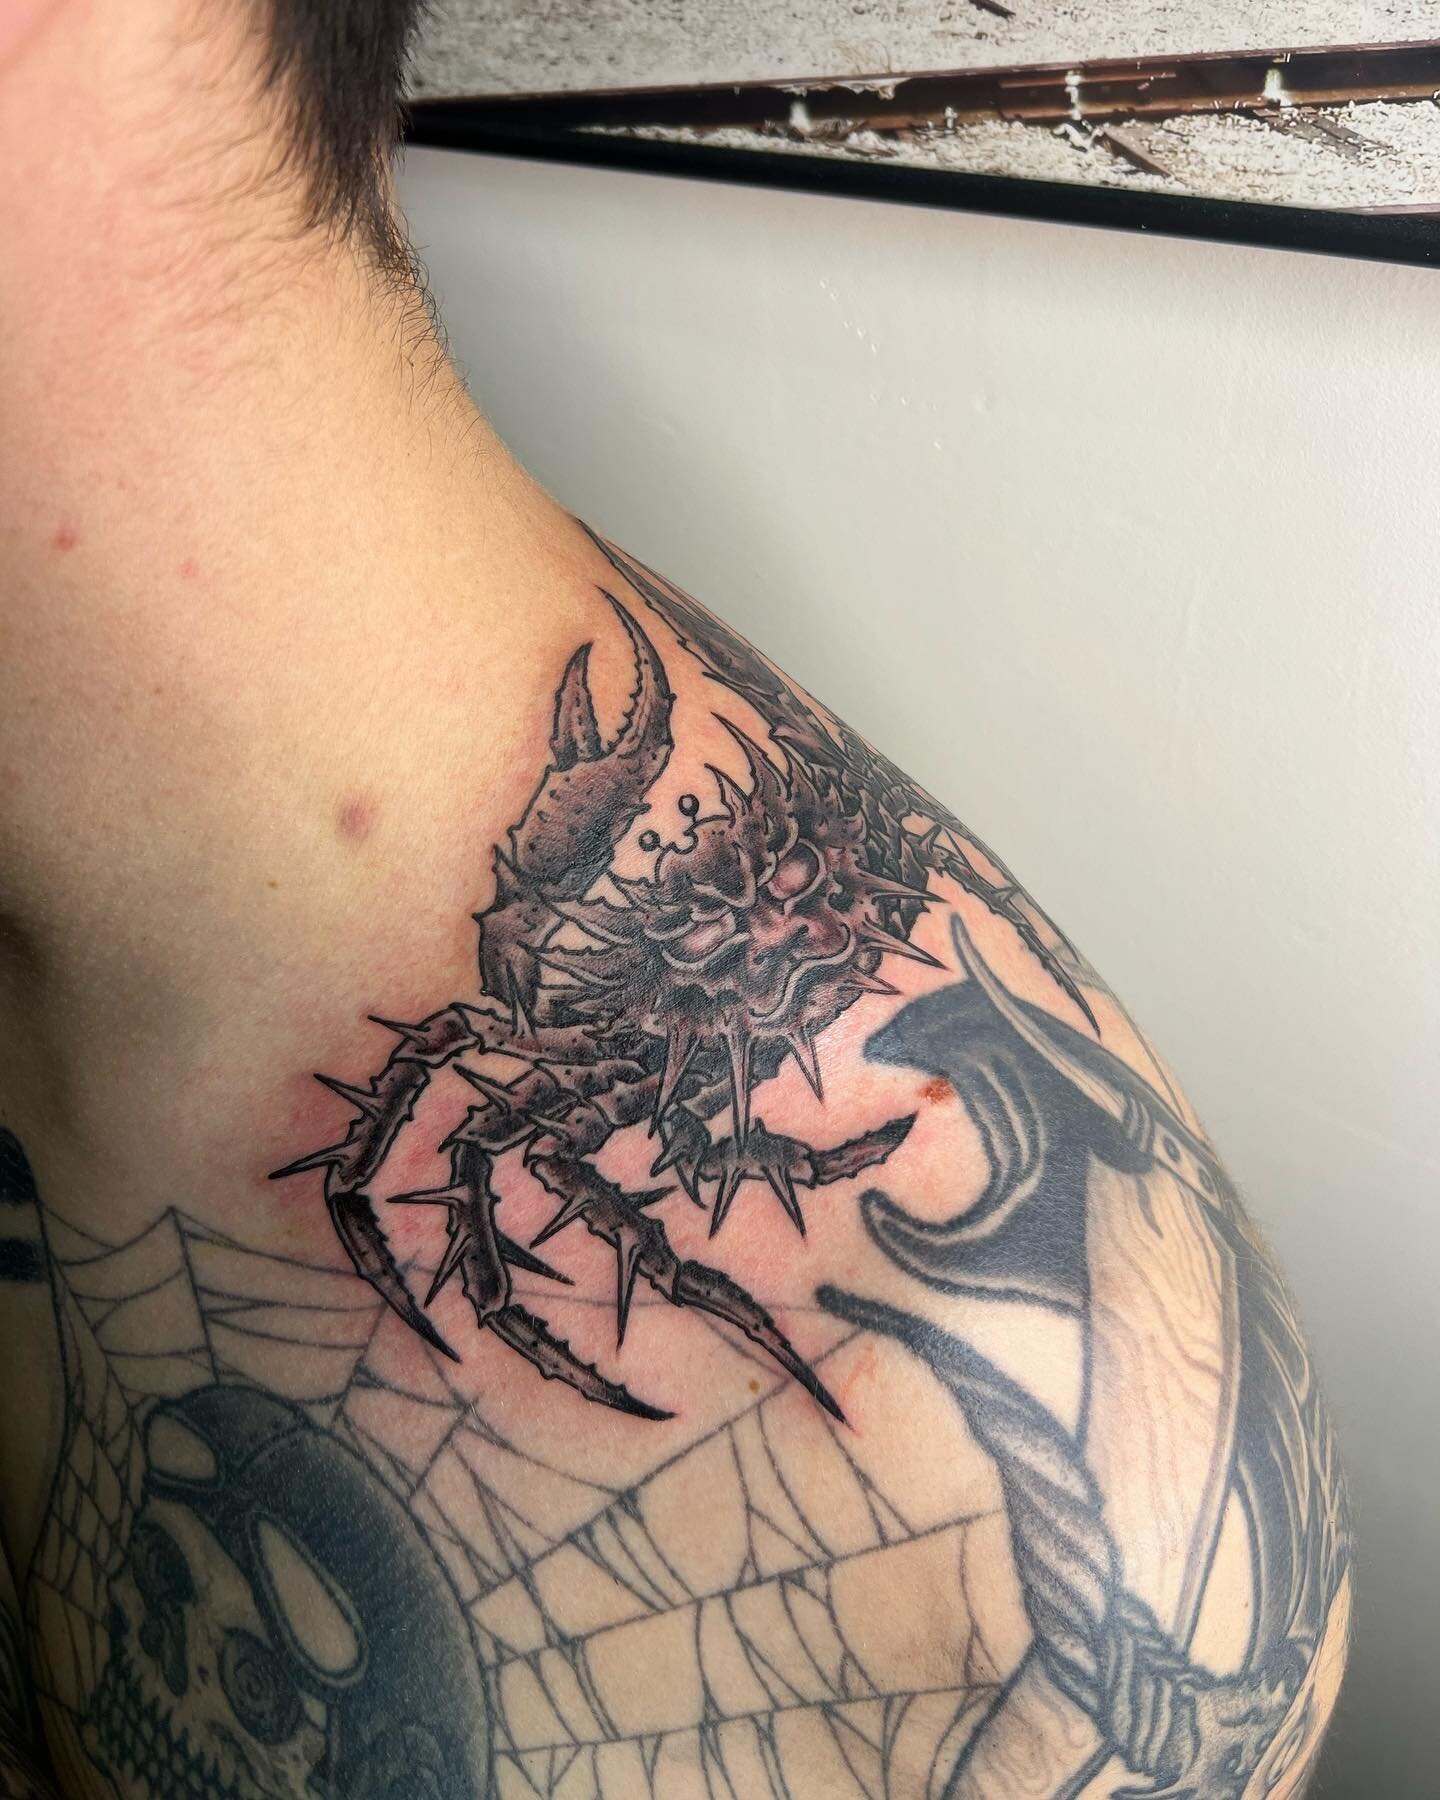 Draw on to fit with a little over the top action @805ink .
.
.
.
.
.
.
.
.
.
.
.
#tattoo #tattoos #santabarbara #805 #goleta #islavista #california #sb #crablegs #crabby #themsisbugs